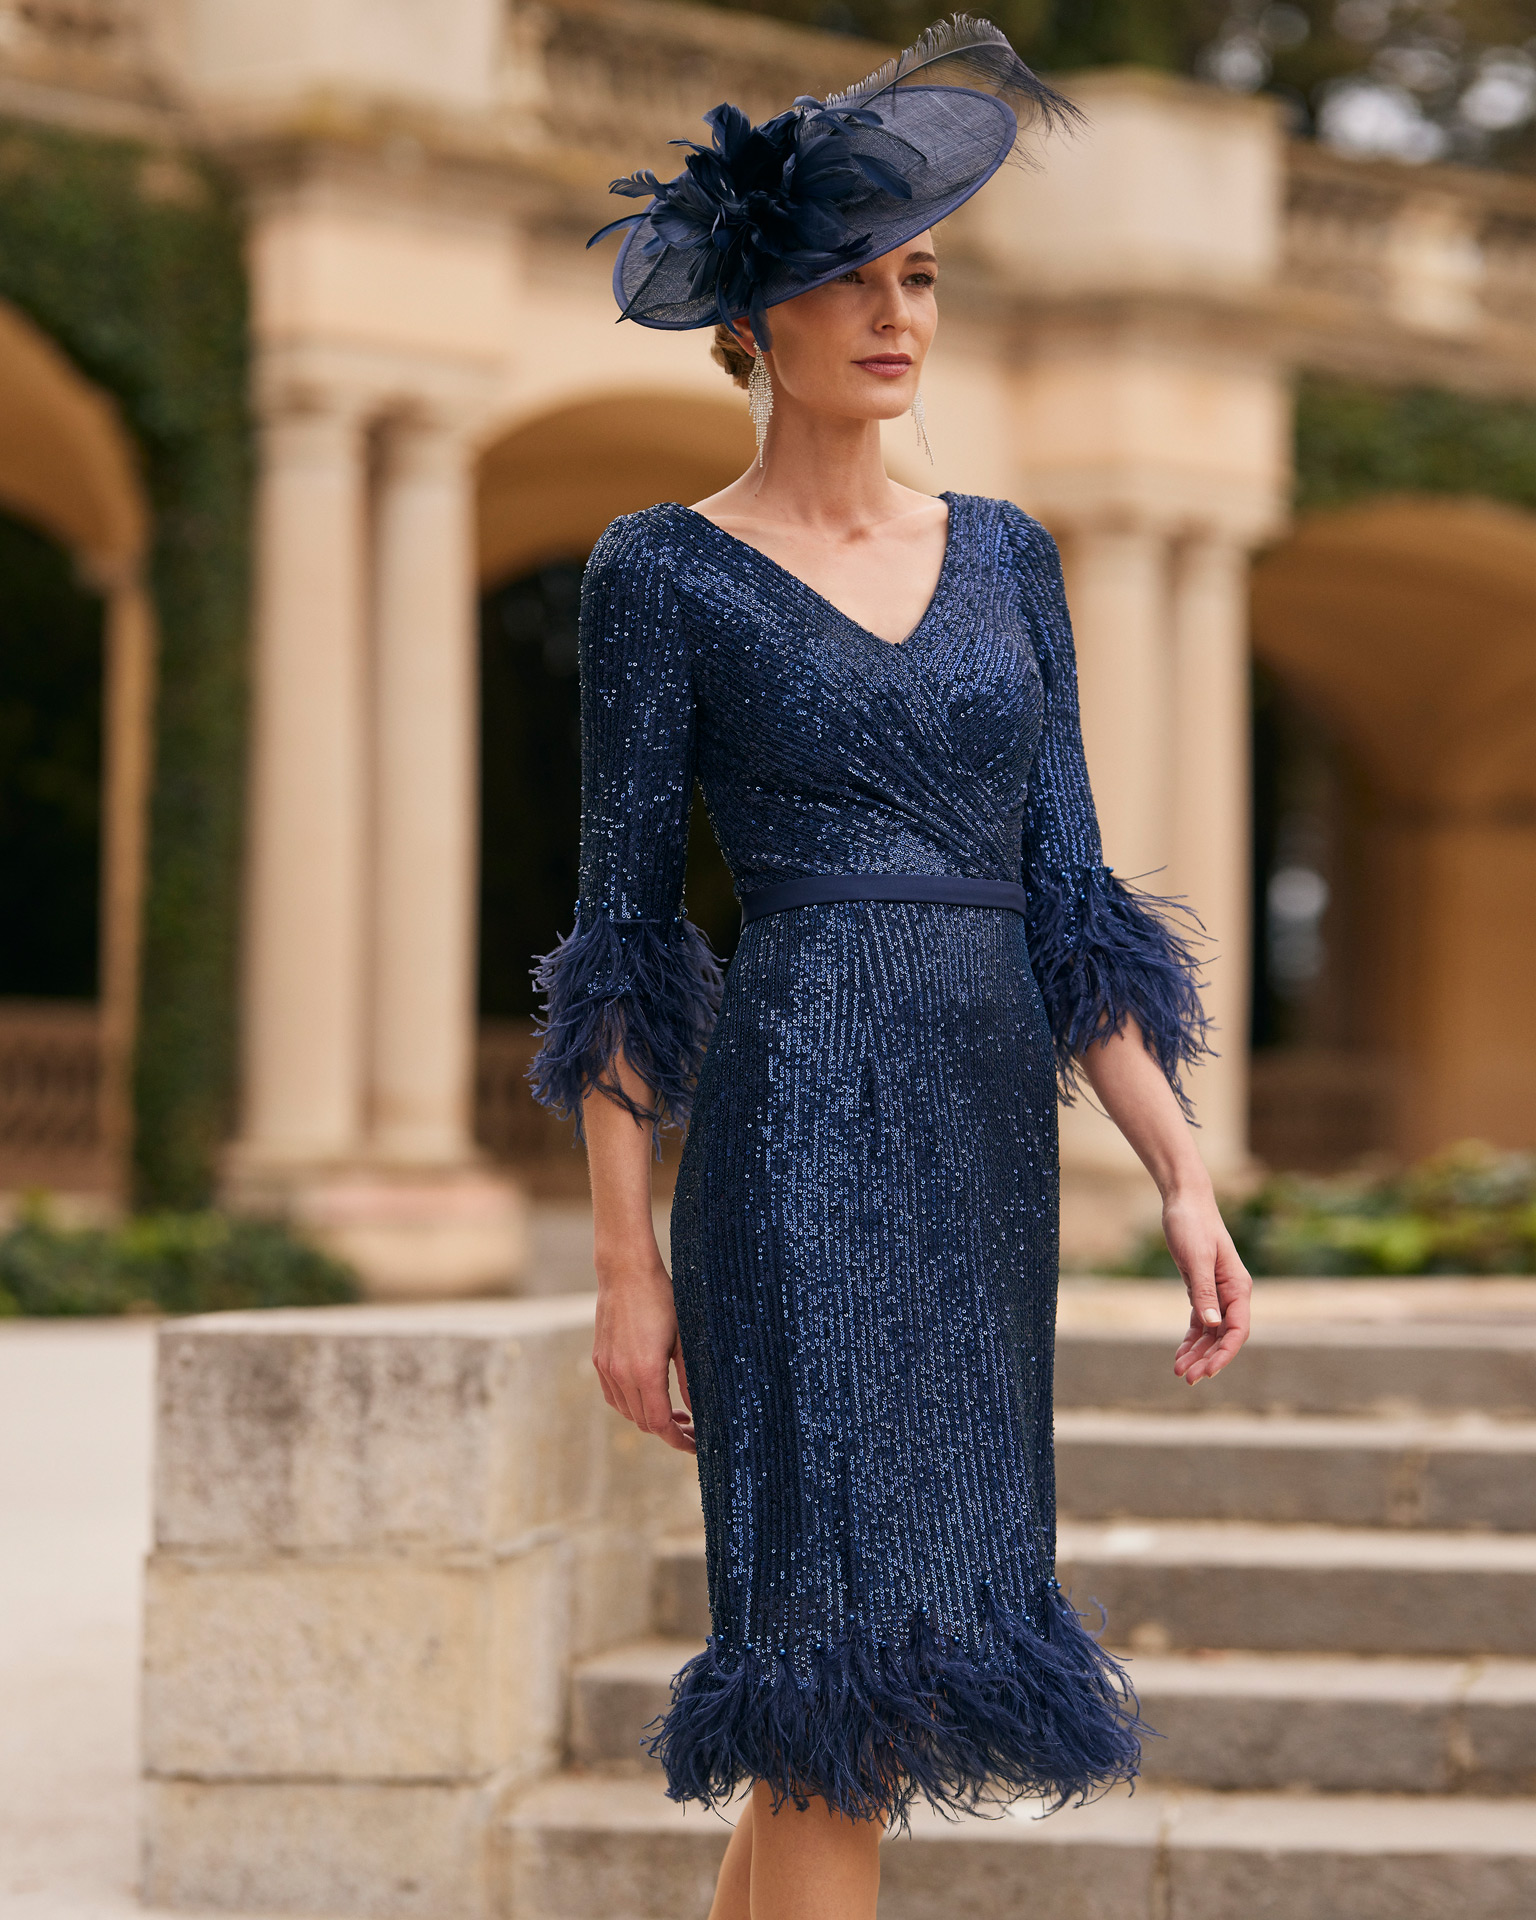 Elegant short cocktail dress. Made with beadwork. With V-neckline and feathered three-quarter sleeves. Couture Club design for parties and events. MARFIL_BARCELONA.